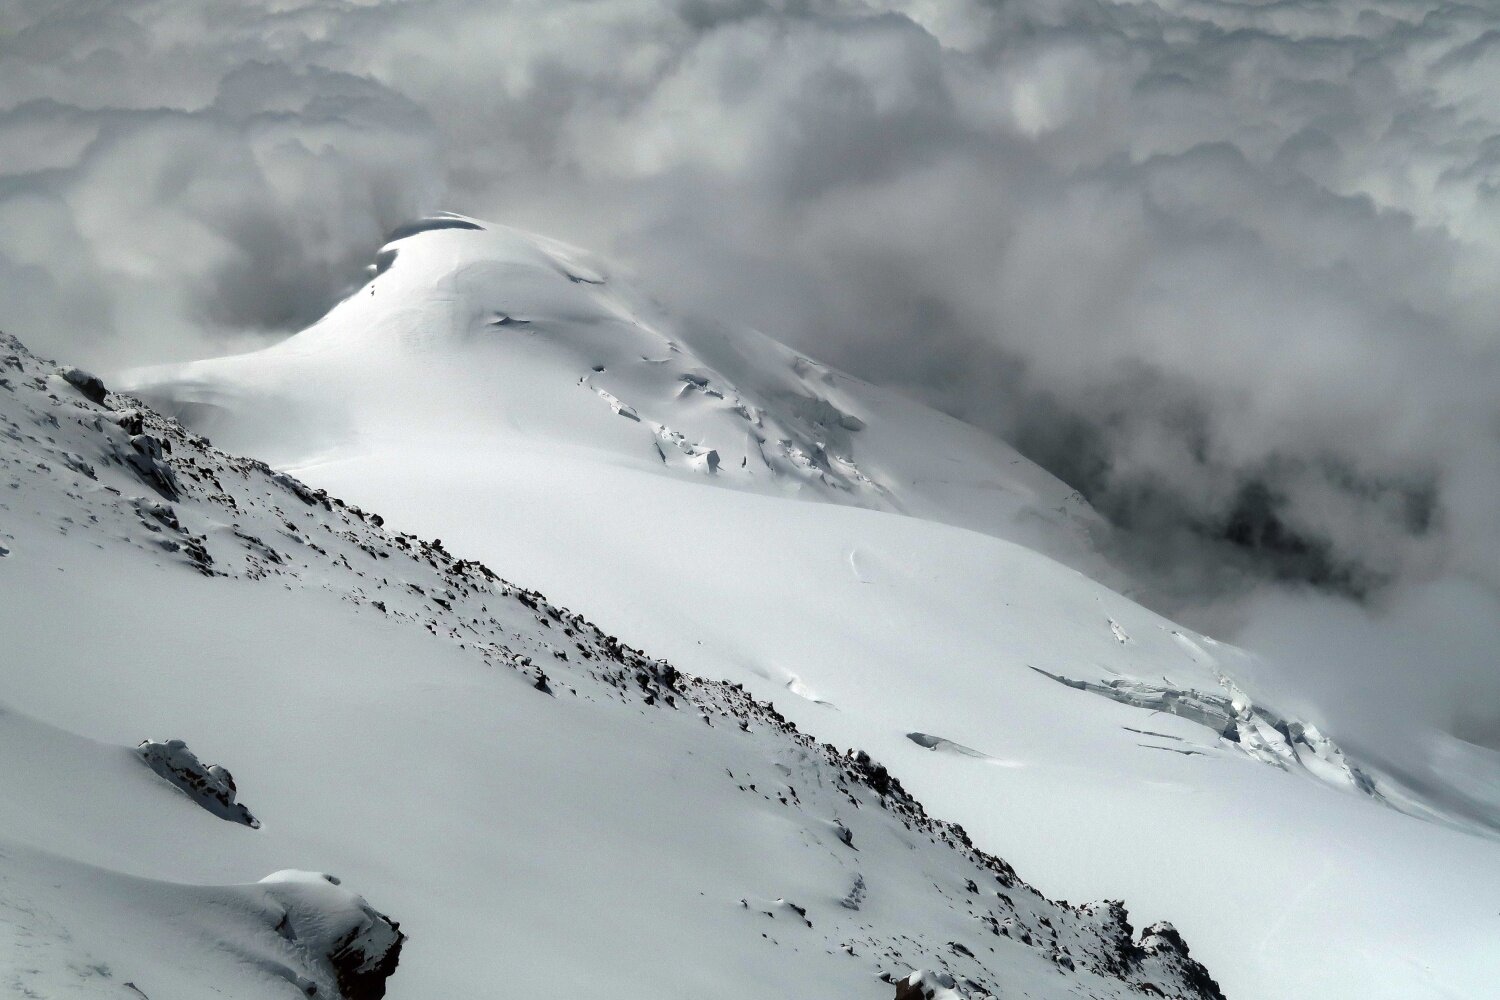 The view from the higher west summit of Mount Elbrus, looking down towards the slightly lower east summit.